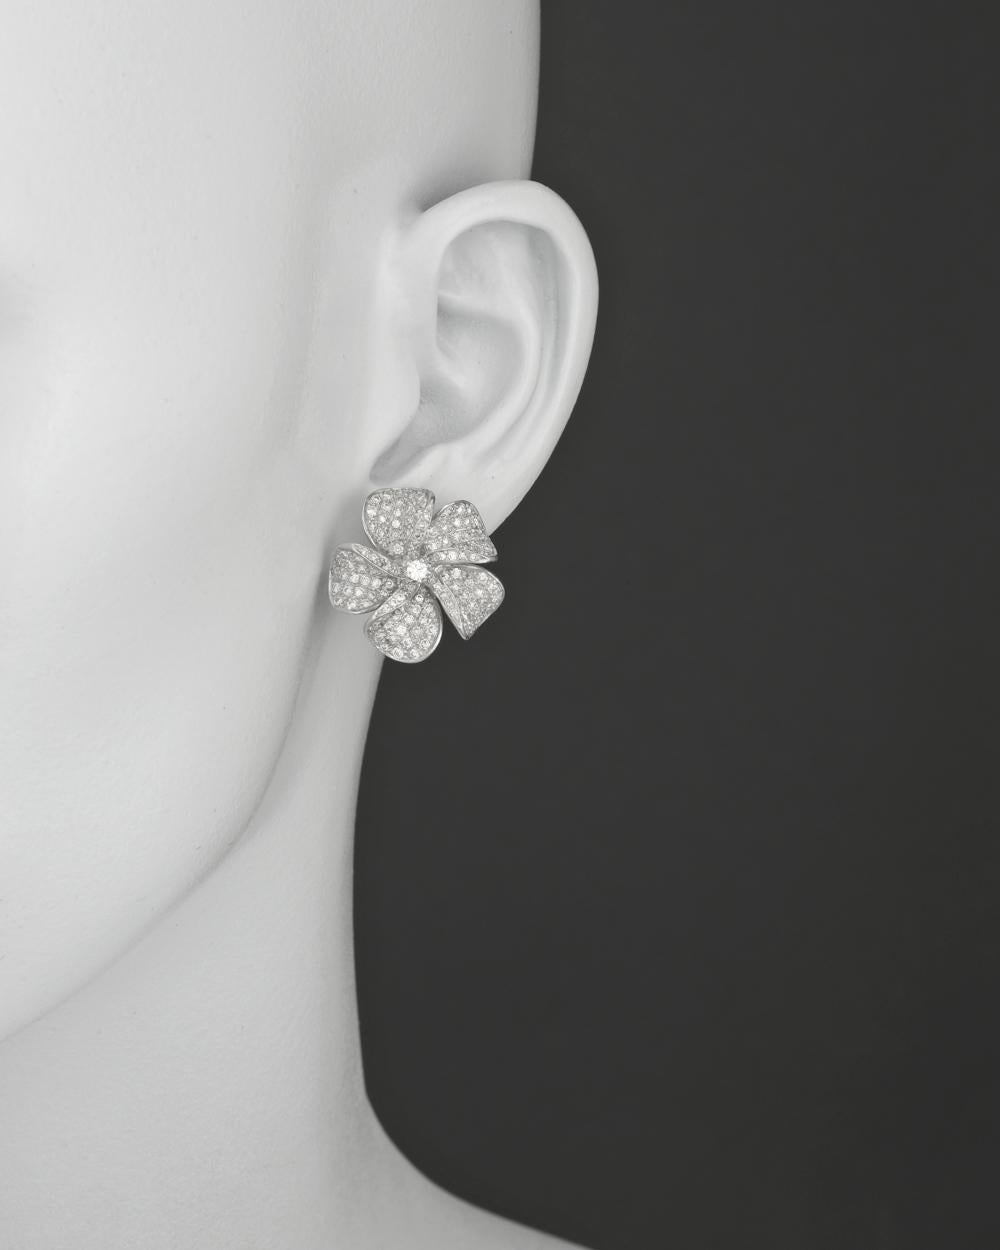 Pavé diamond flower earclips in 18k white gold. Round-cut diamonds weighing 1.75 total carats. 0.8